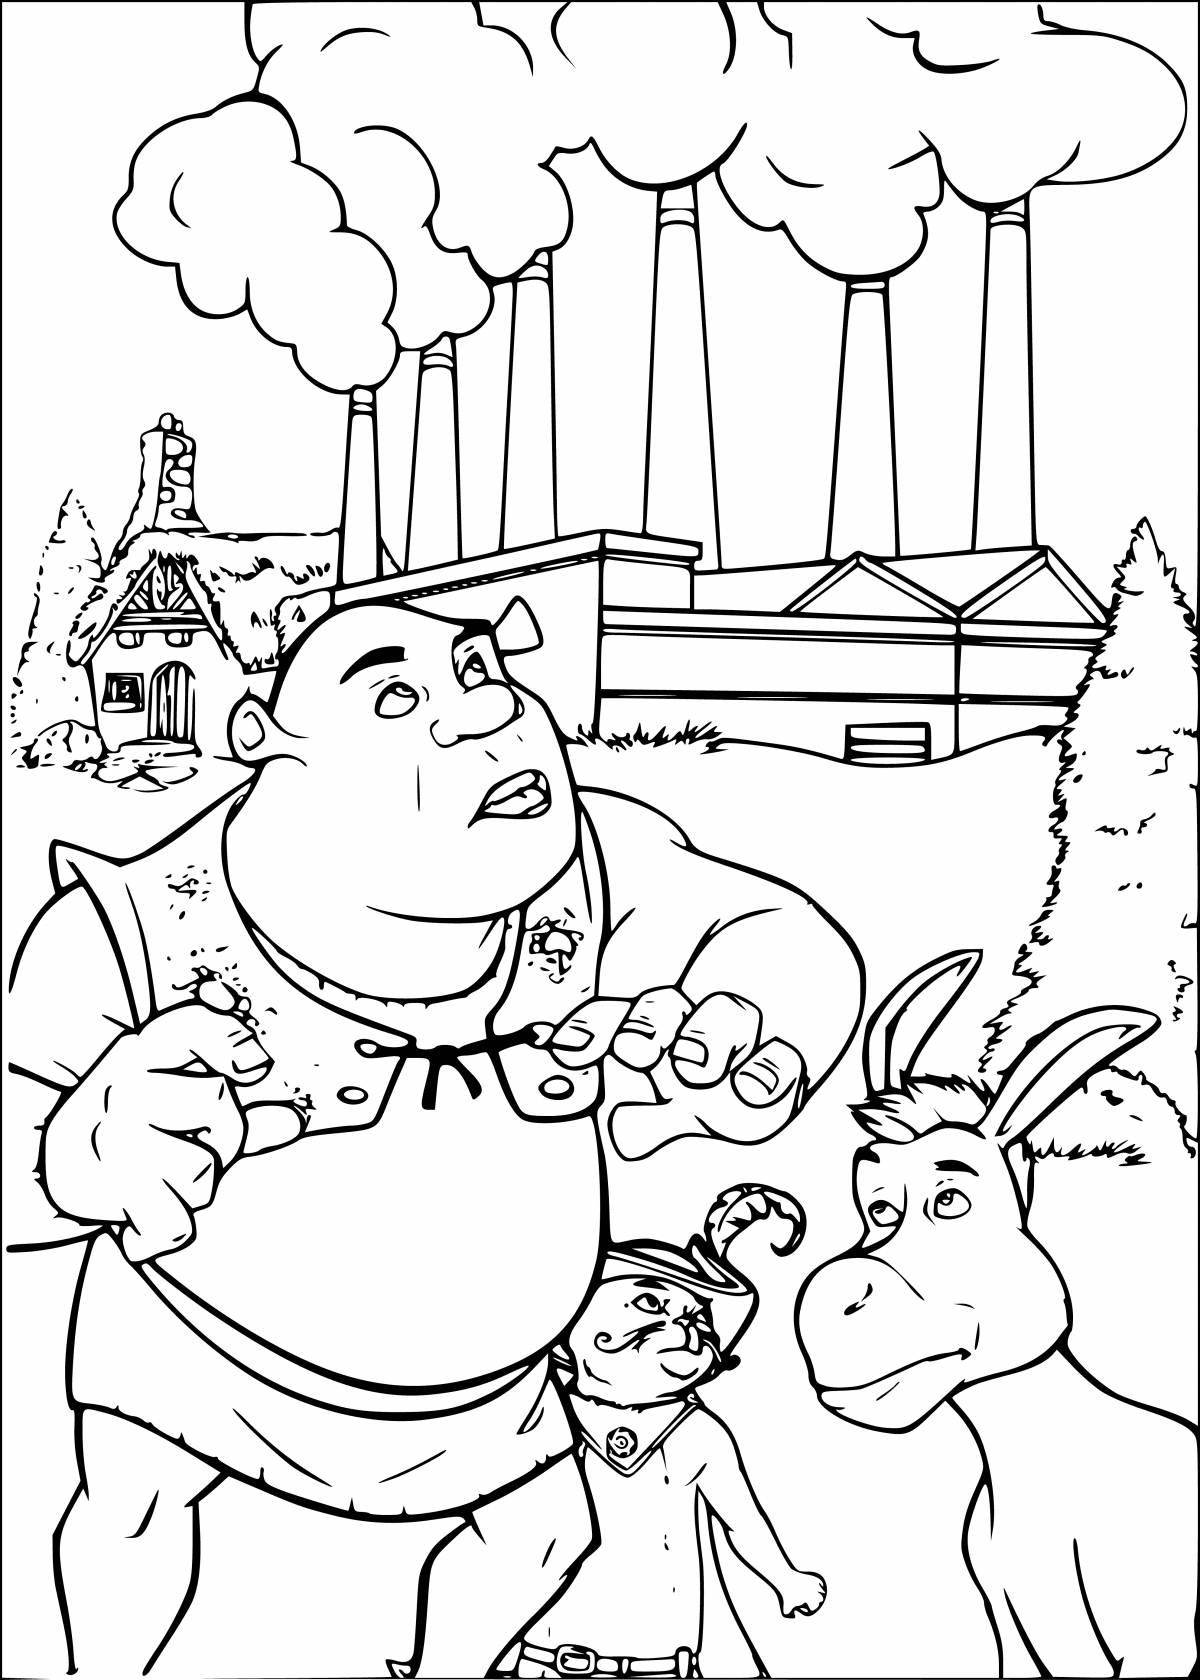 Colorful shrek coloring page